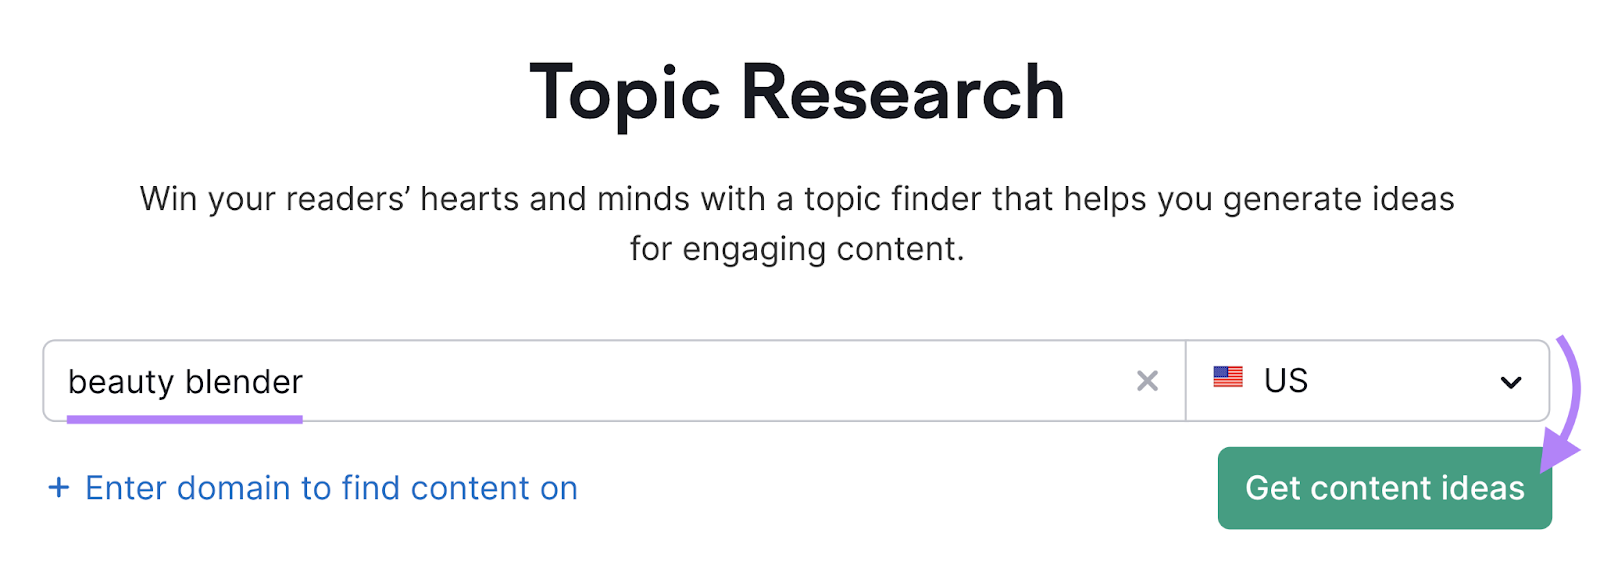 search for beauty blender in topic research tool